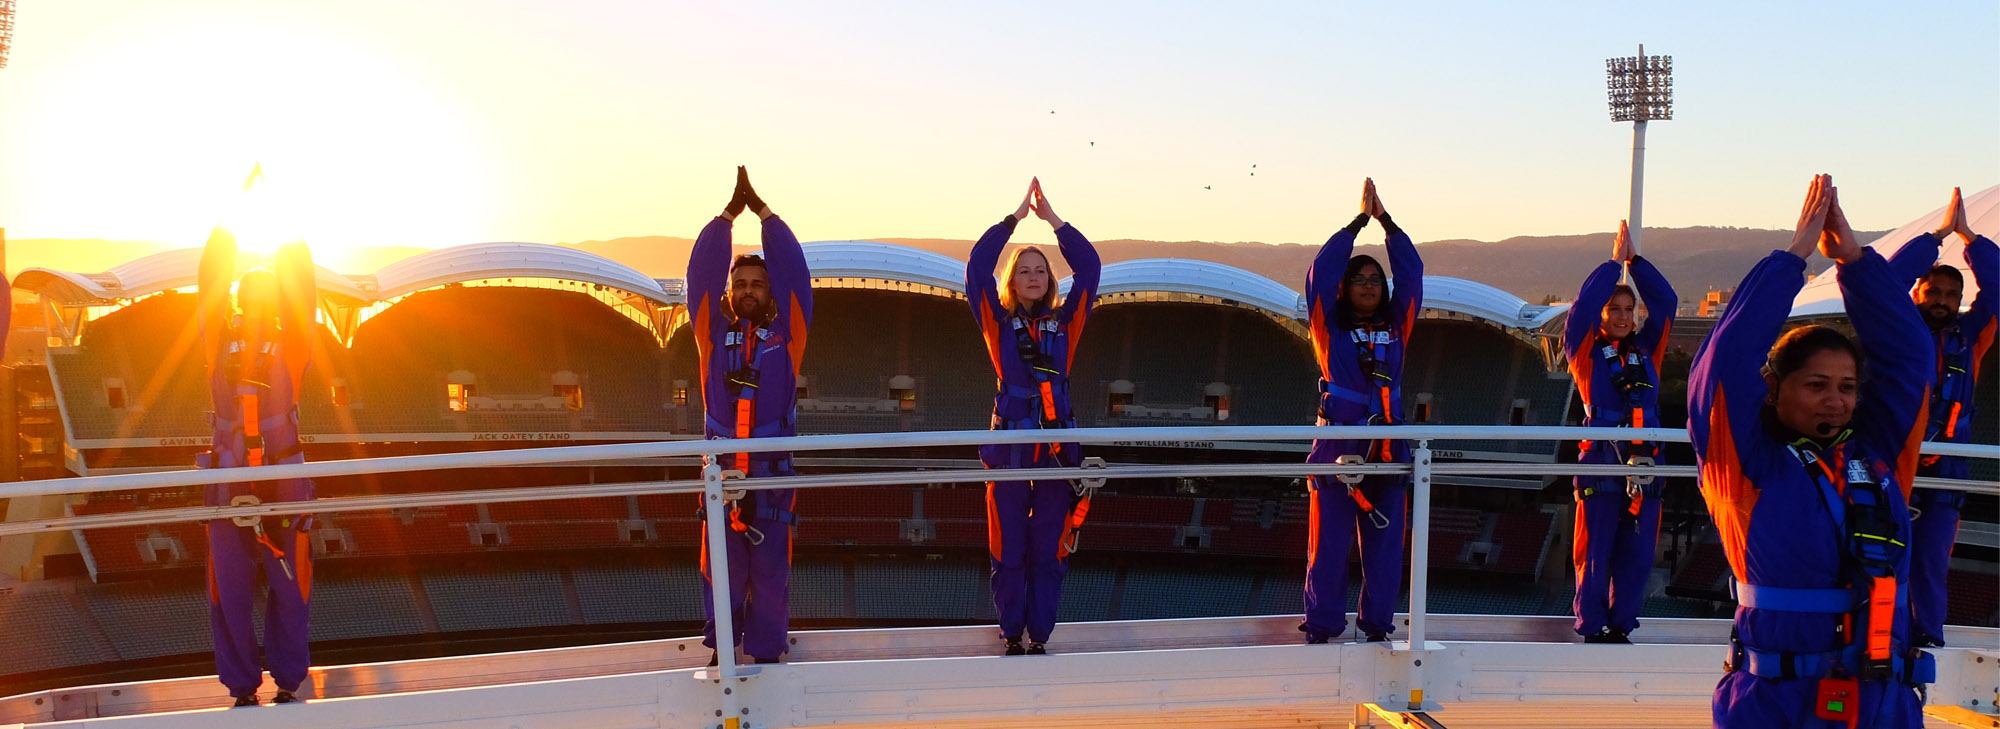 RoofClimb Yoga. Adelaide Oval. Cultural Attractions of Australia.